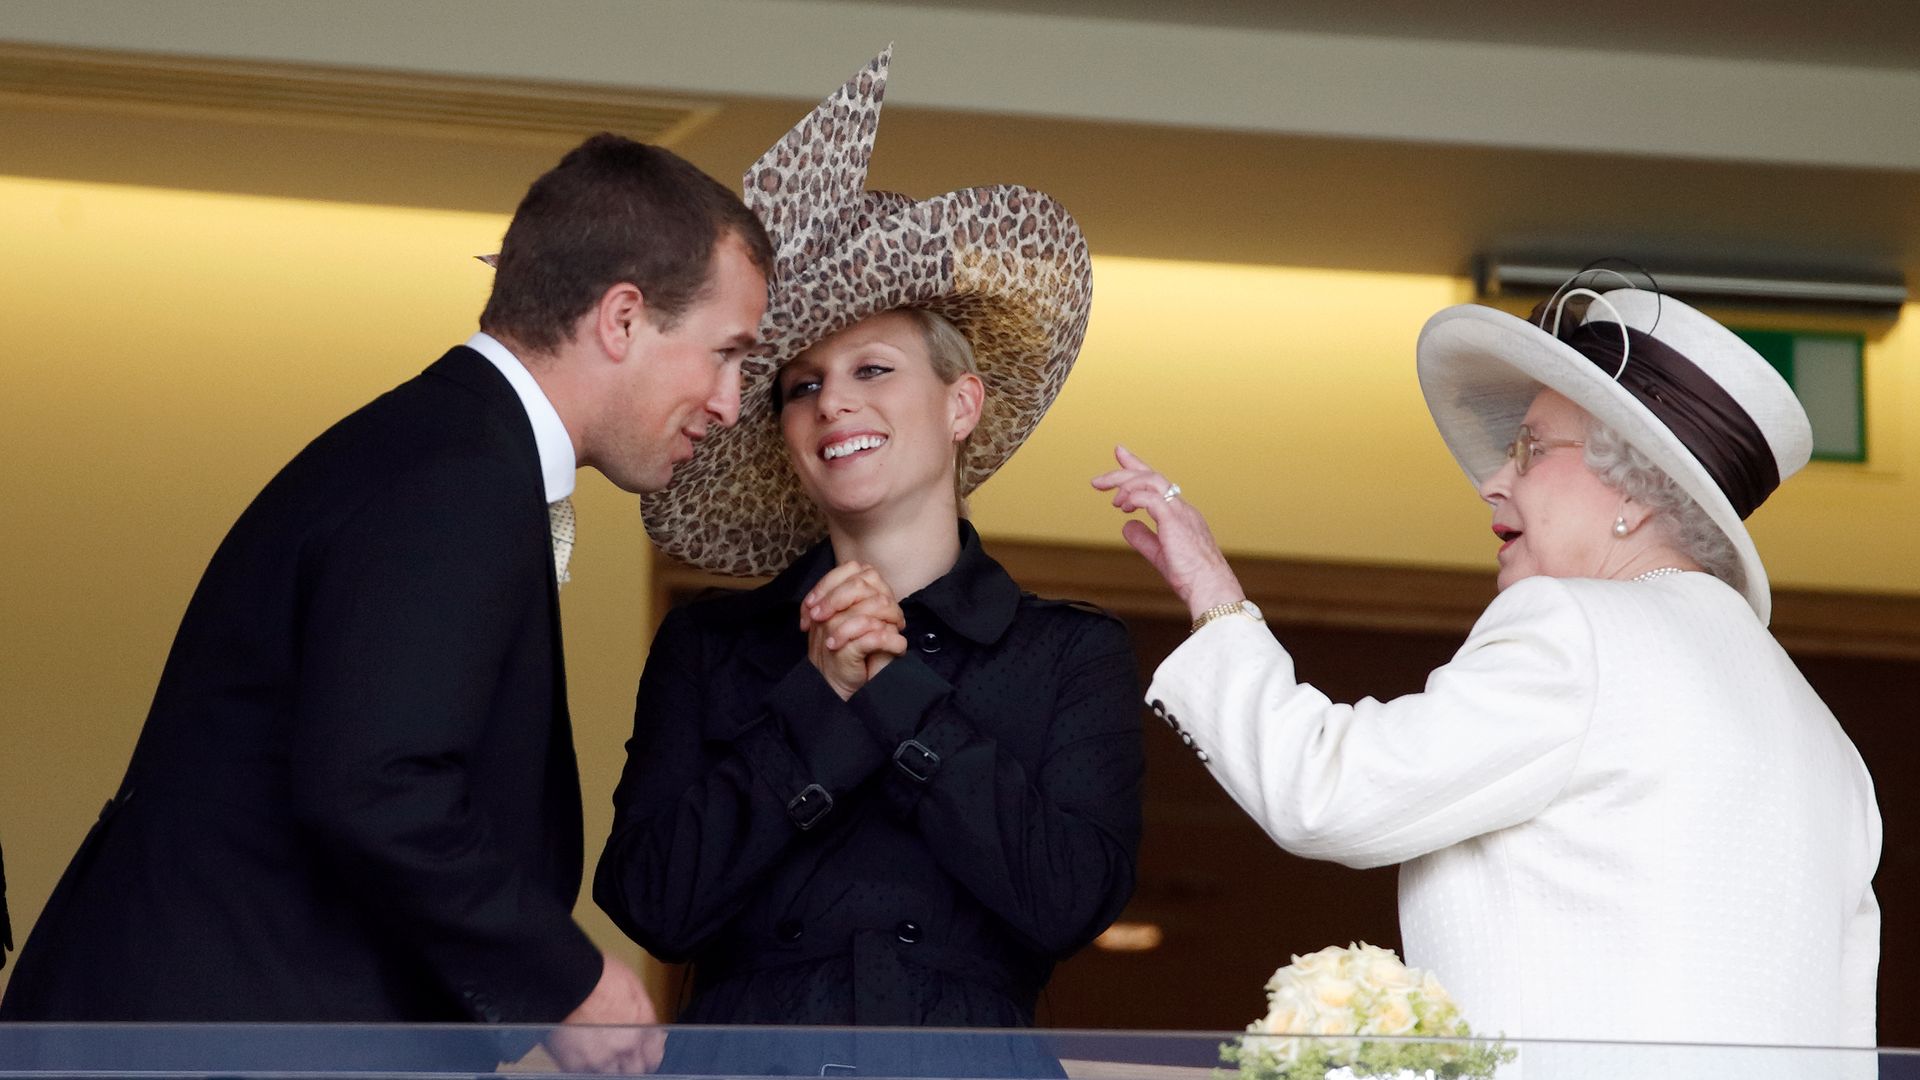 The Queen, Zara and Peter sharing a laugh at Royal Ascot 2007